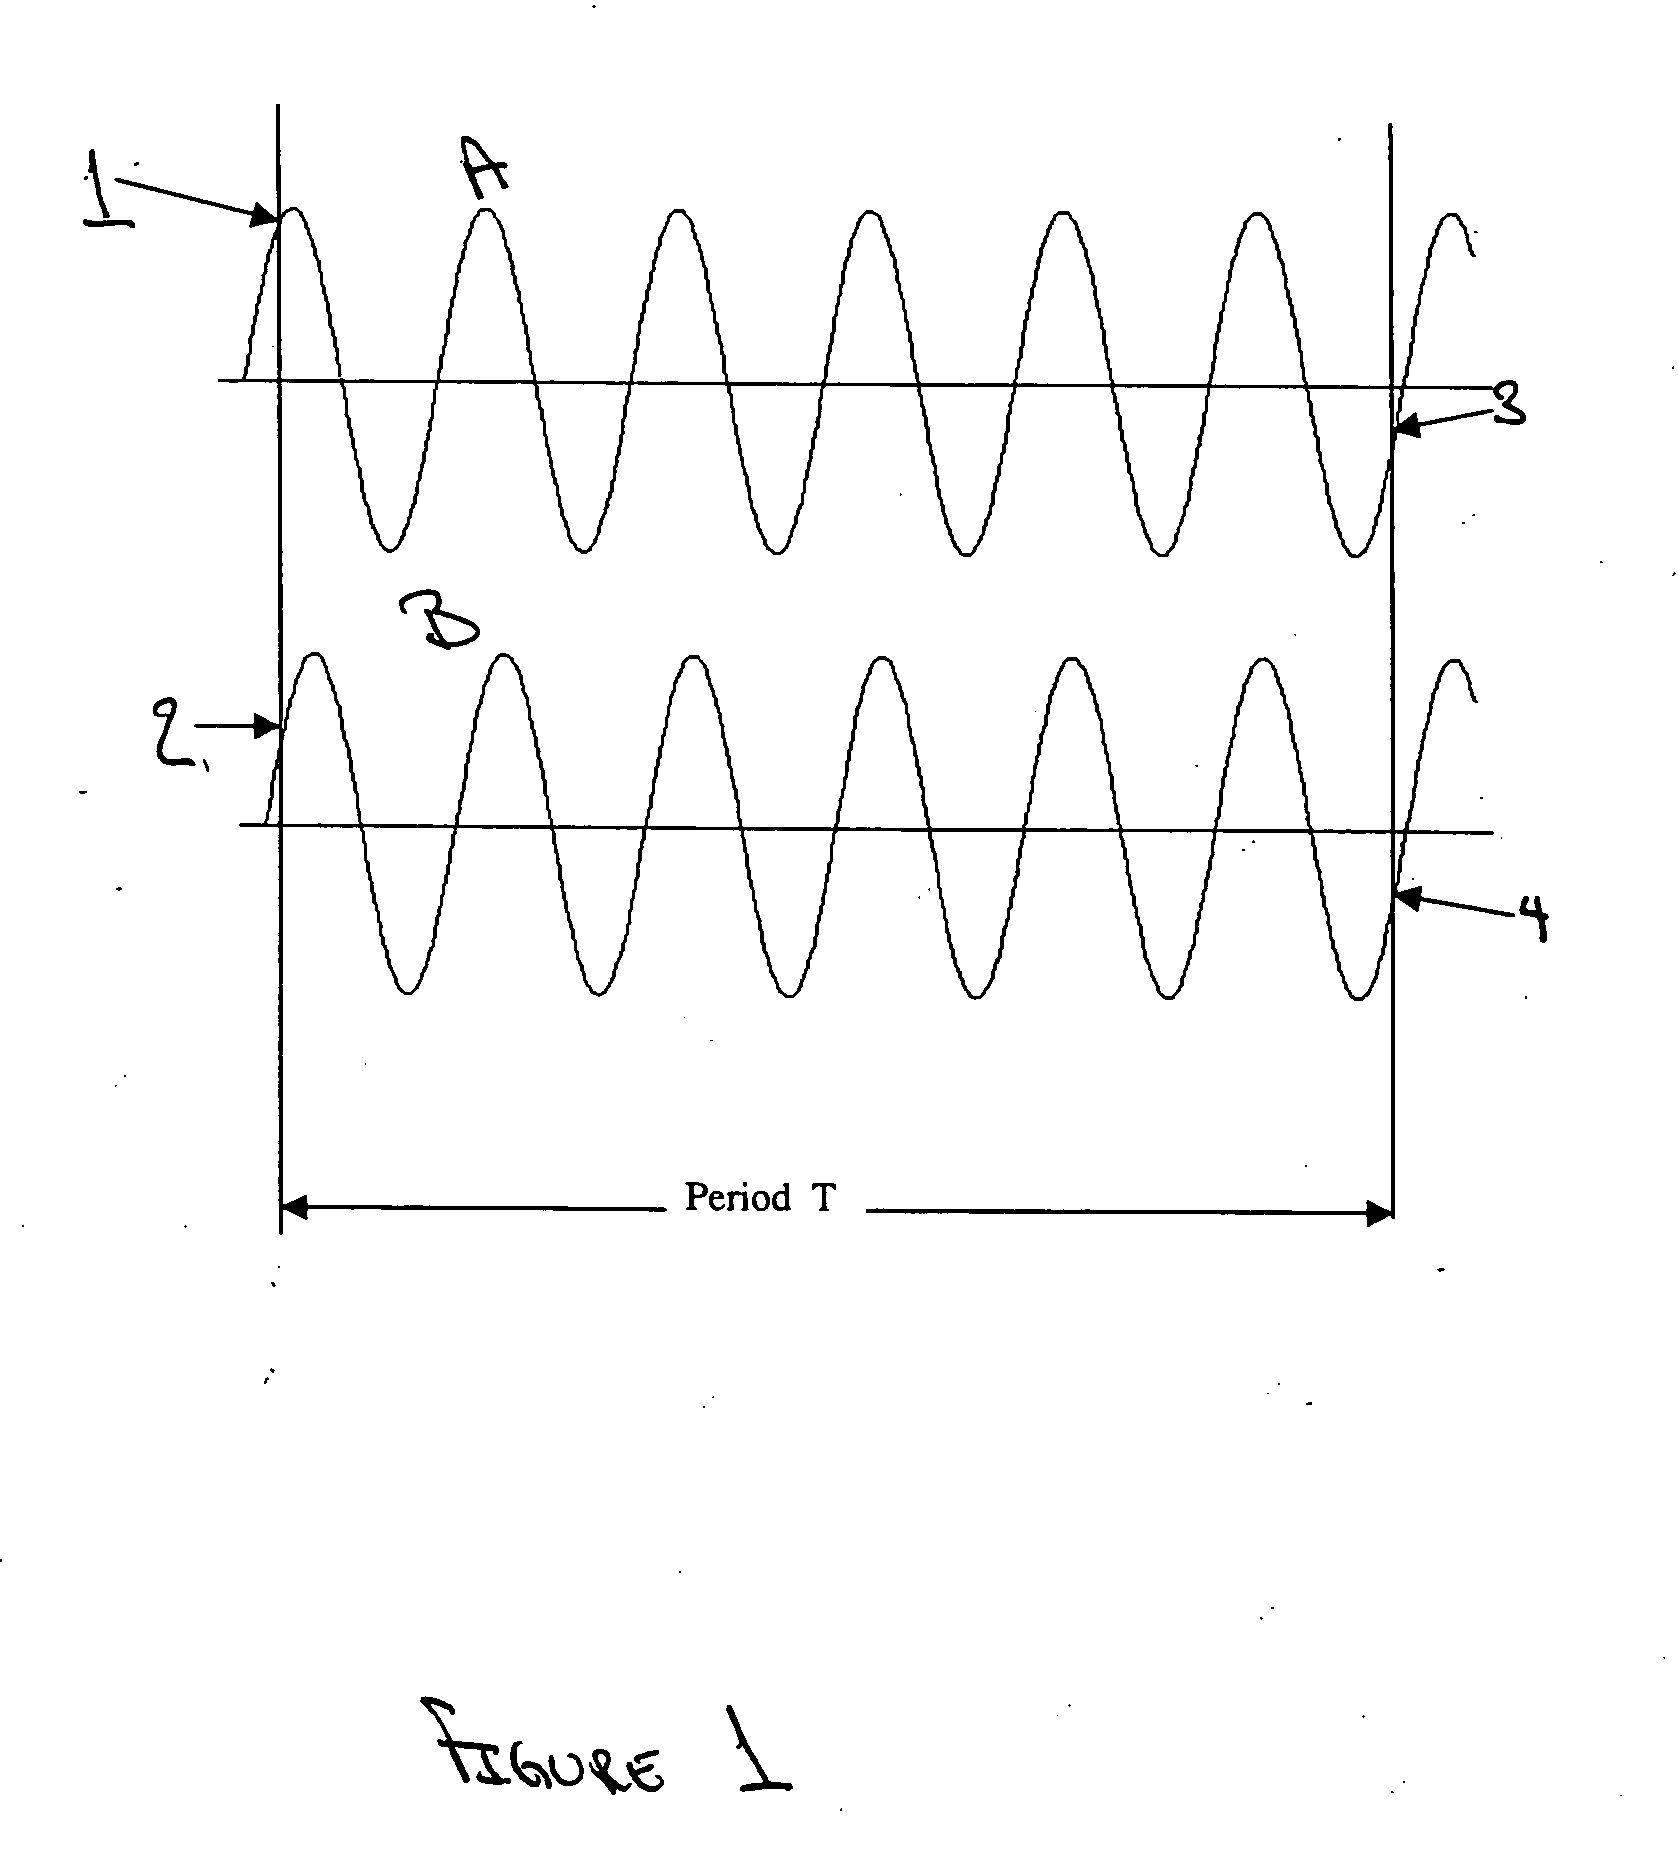 Tuning of nuclear magnetic resonance logging tools